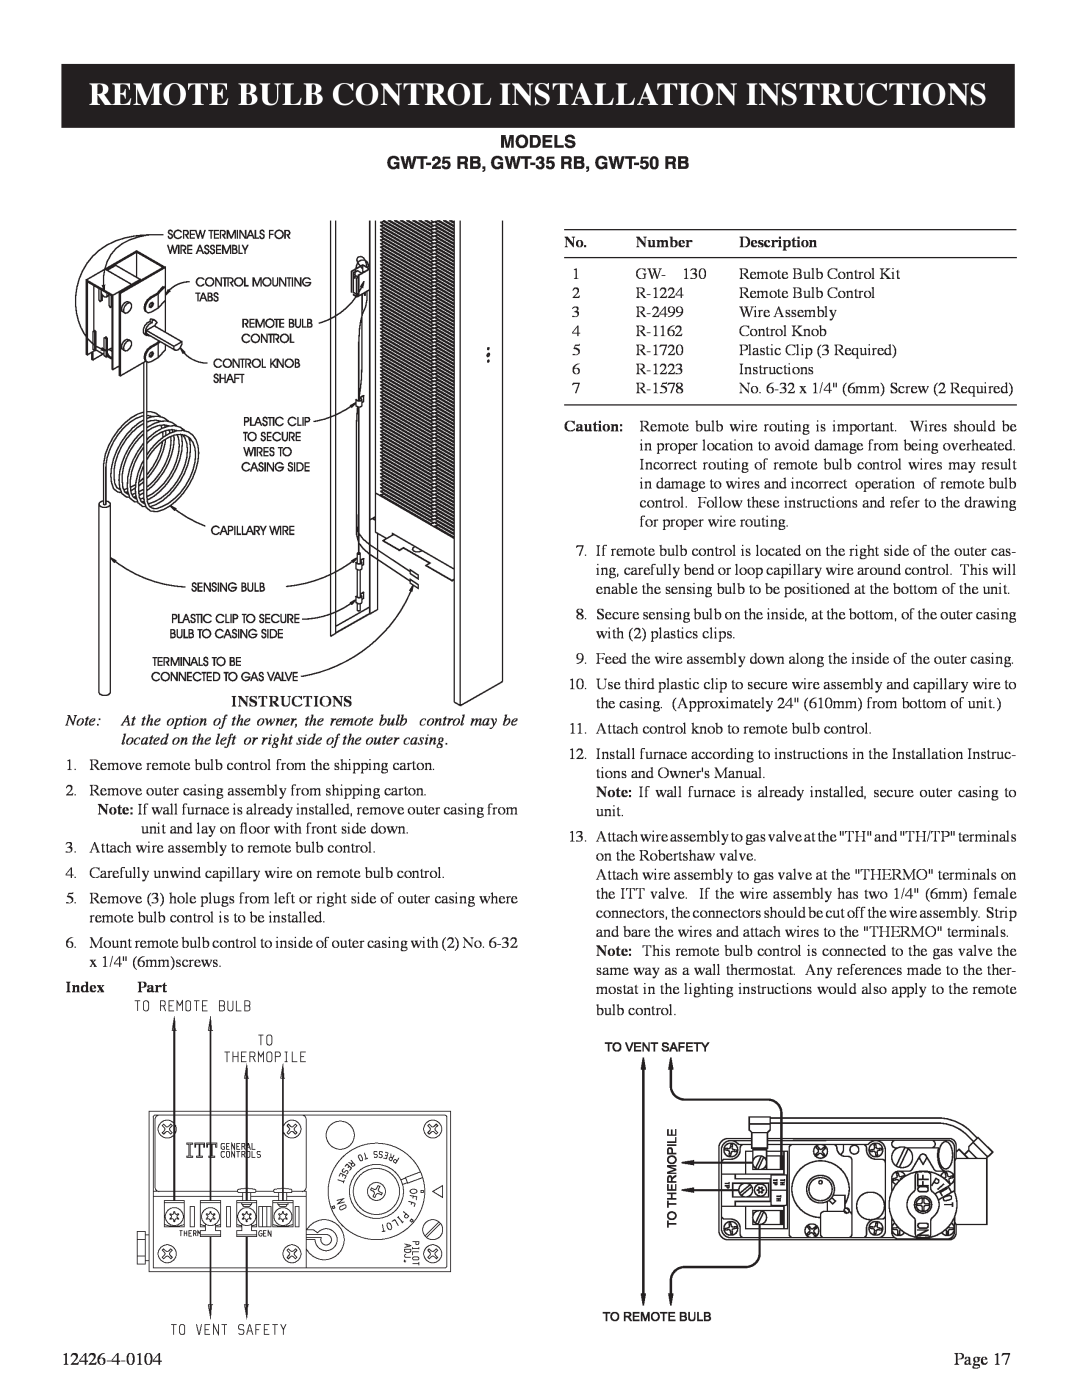 Empire Comfort Systems RB) Remote Bulb Control Installation Instructions, MODELS GWT-25RB, GWT-35RB, GWT-50RB, Number 